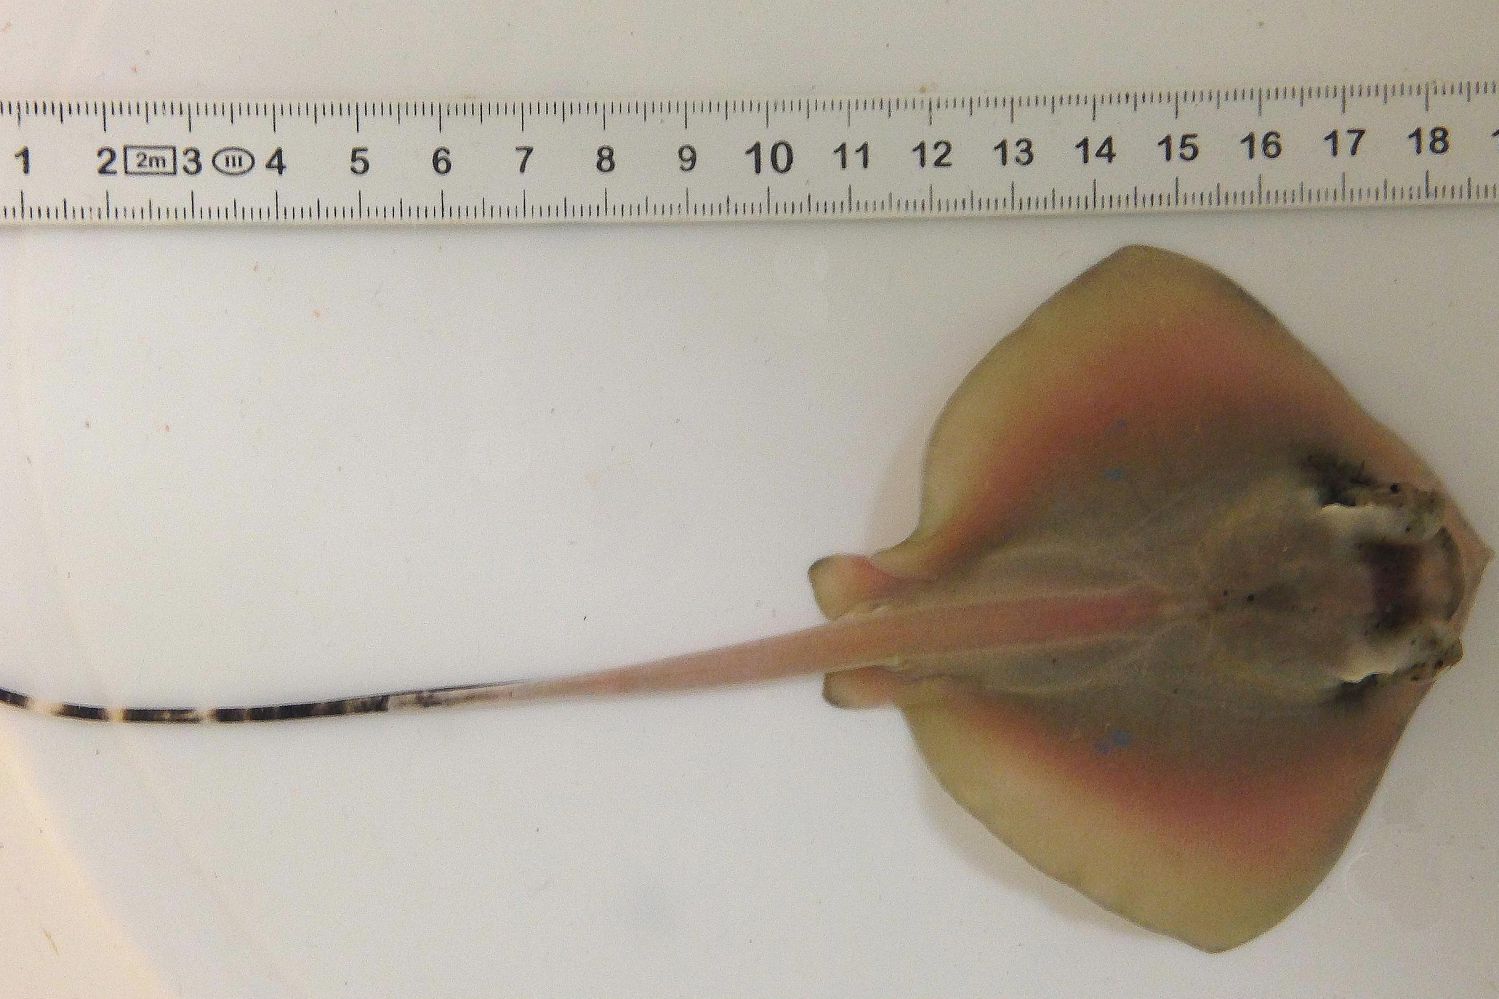 Stingray offspring being measured out